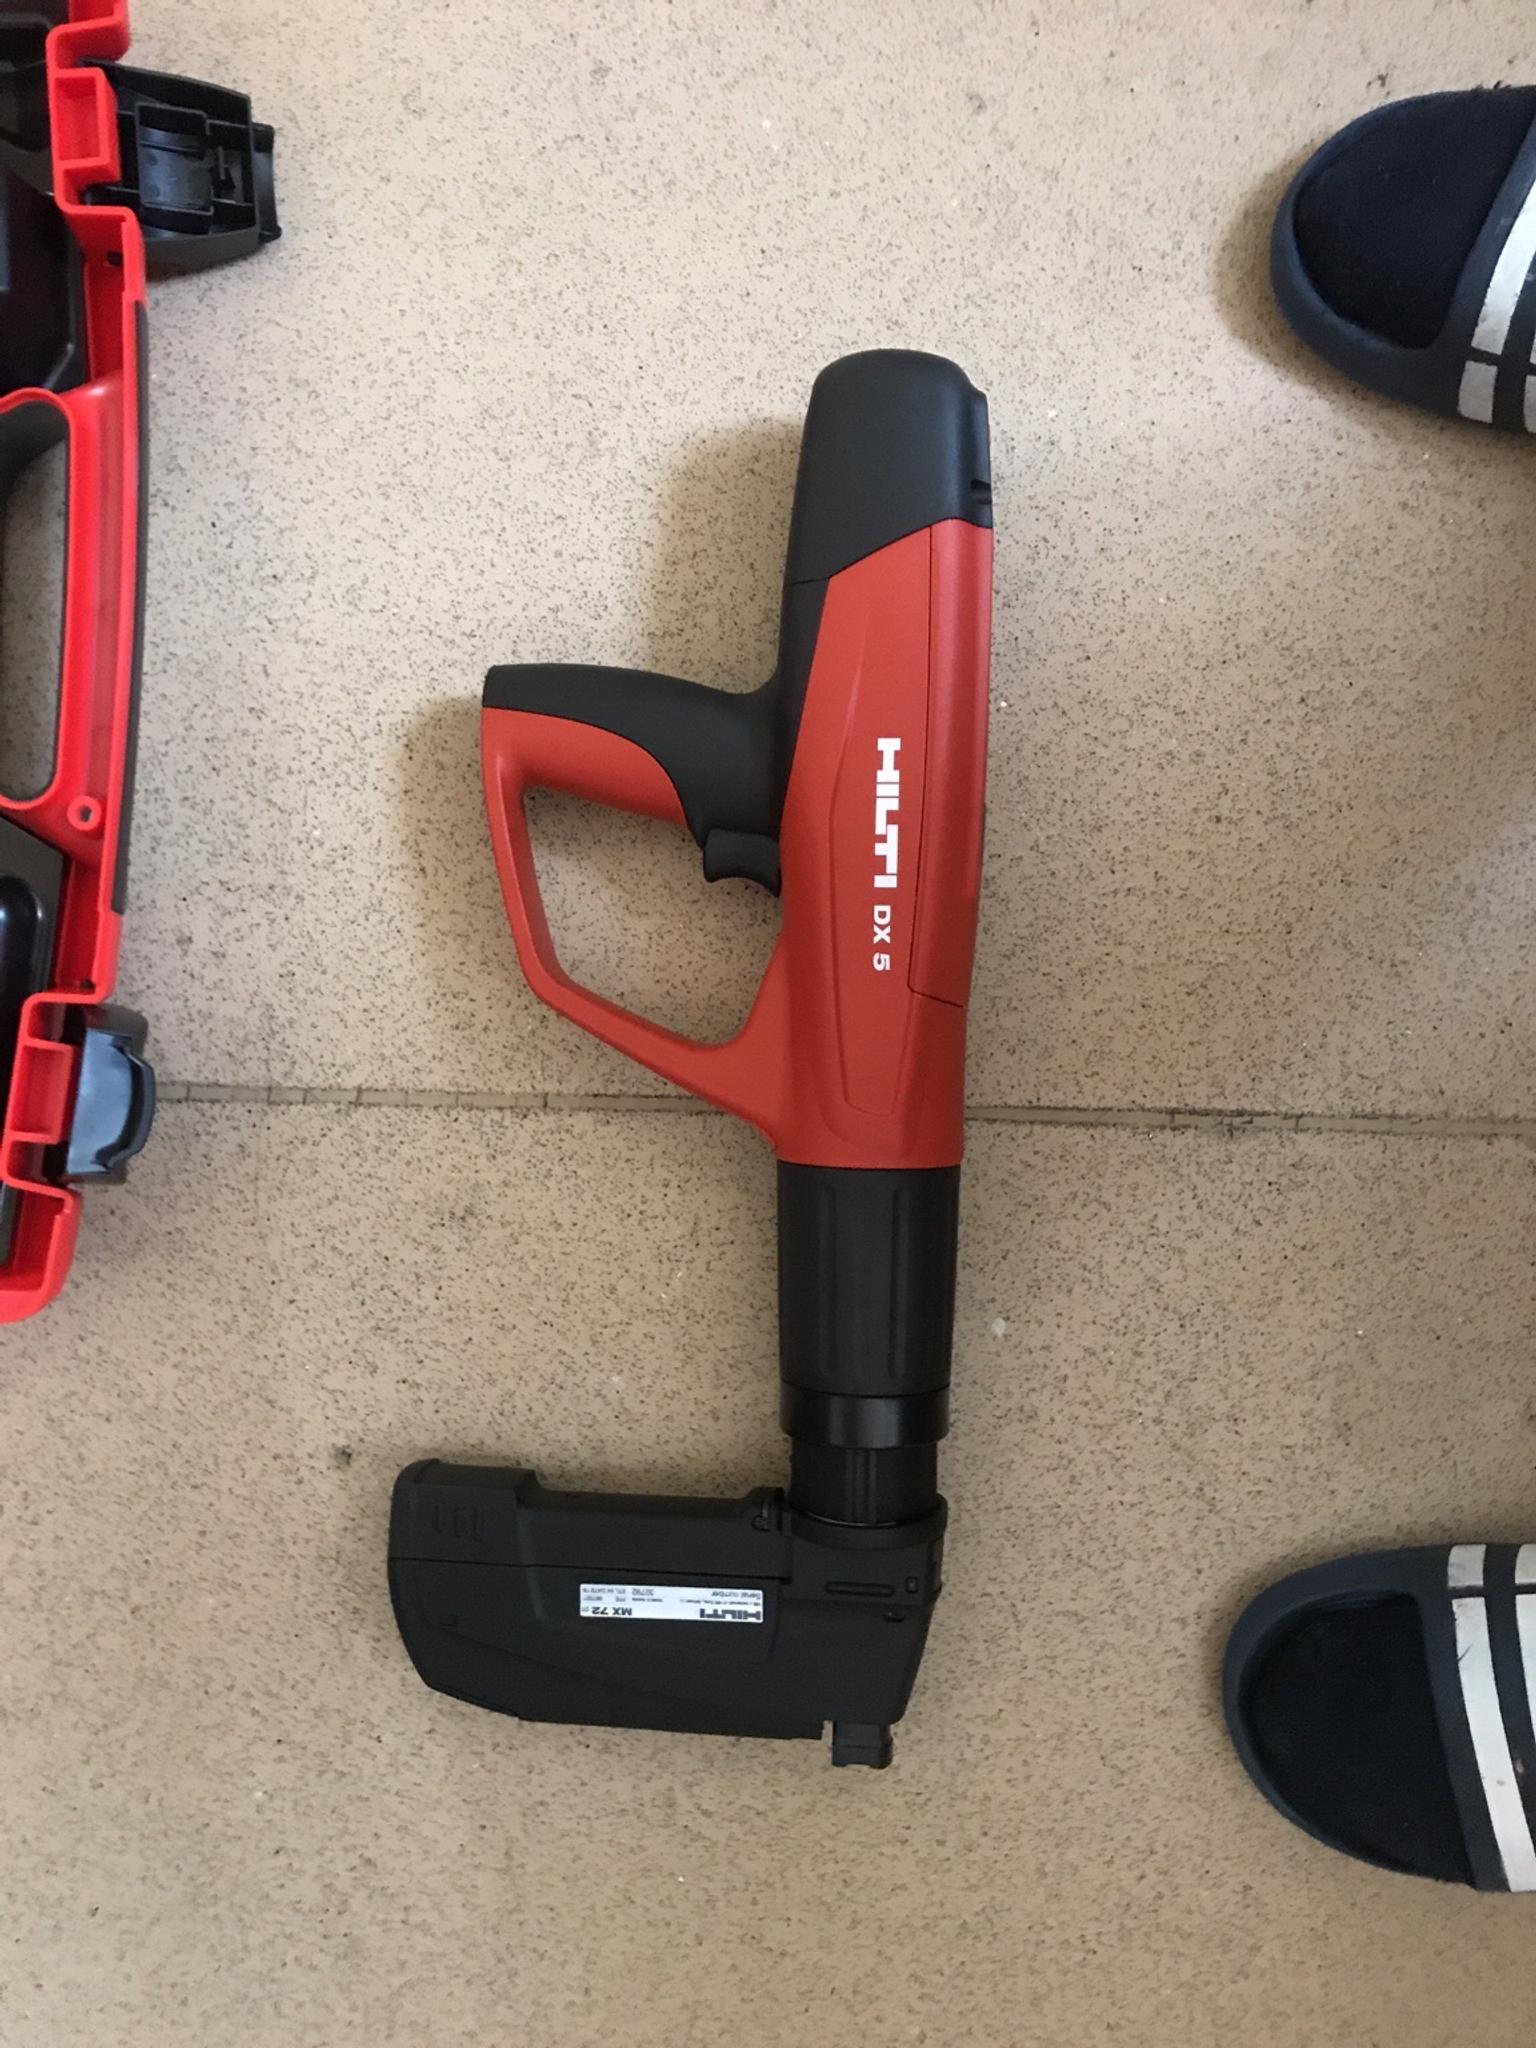 The New Hilti DX5 Powder Actuated Nail Gun in N22 London for £350.00 ...